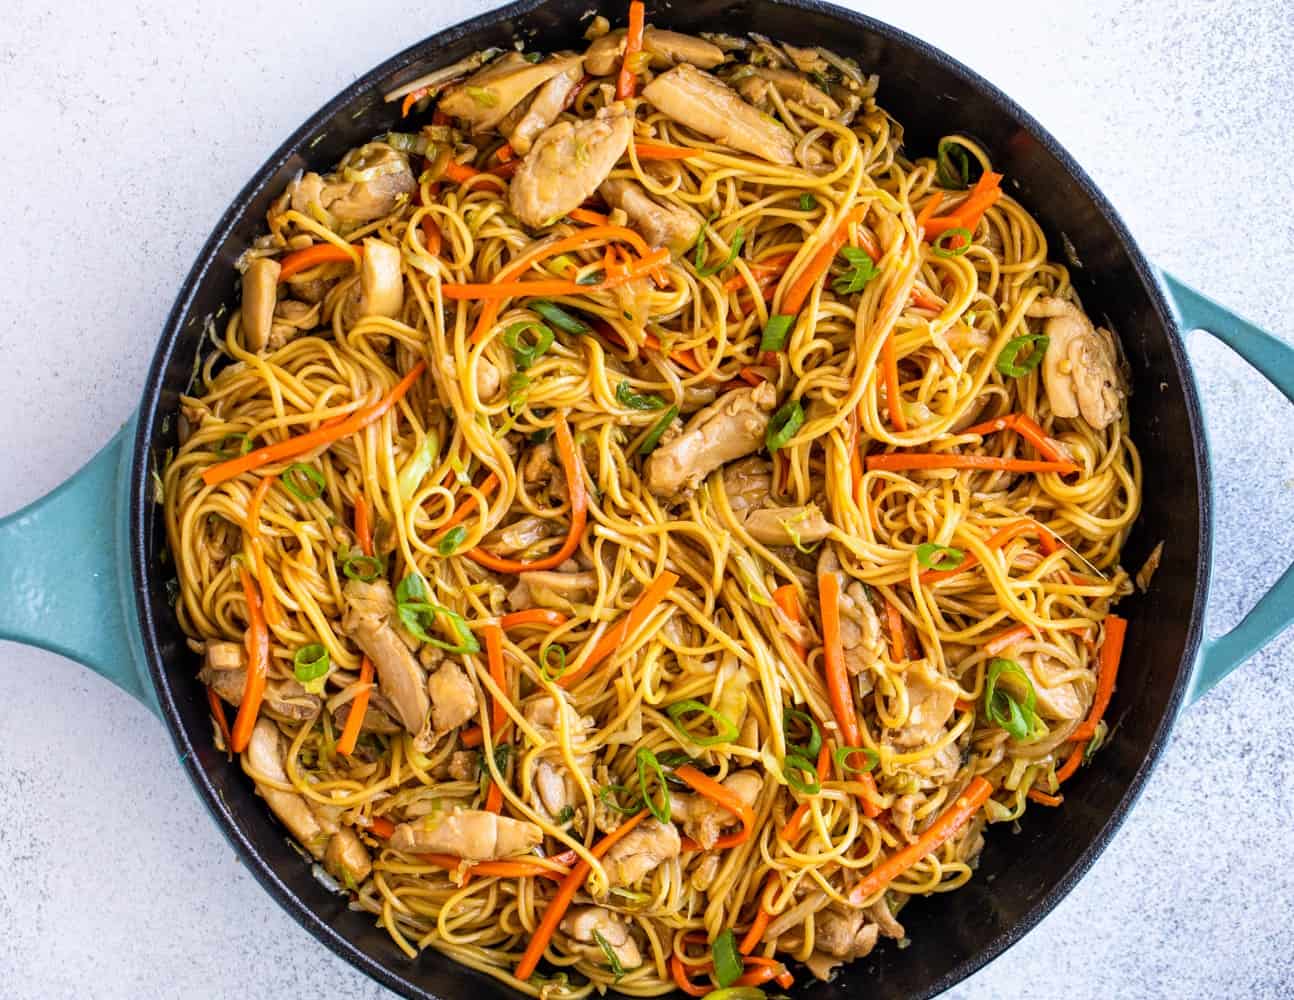 How to Cook the Best Chinese Chow Fun vs Chow Mein